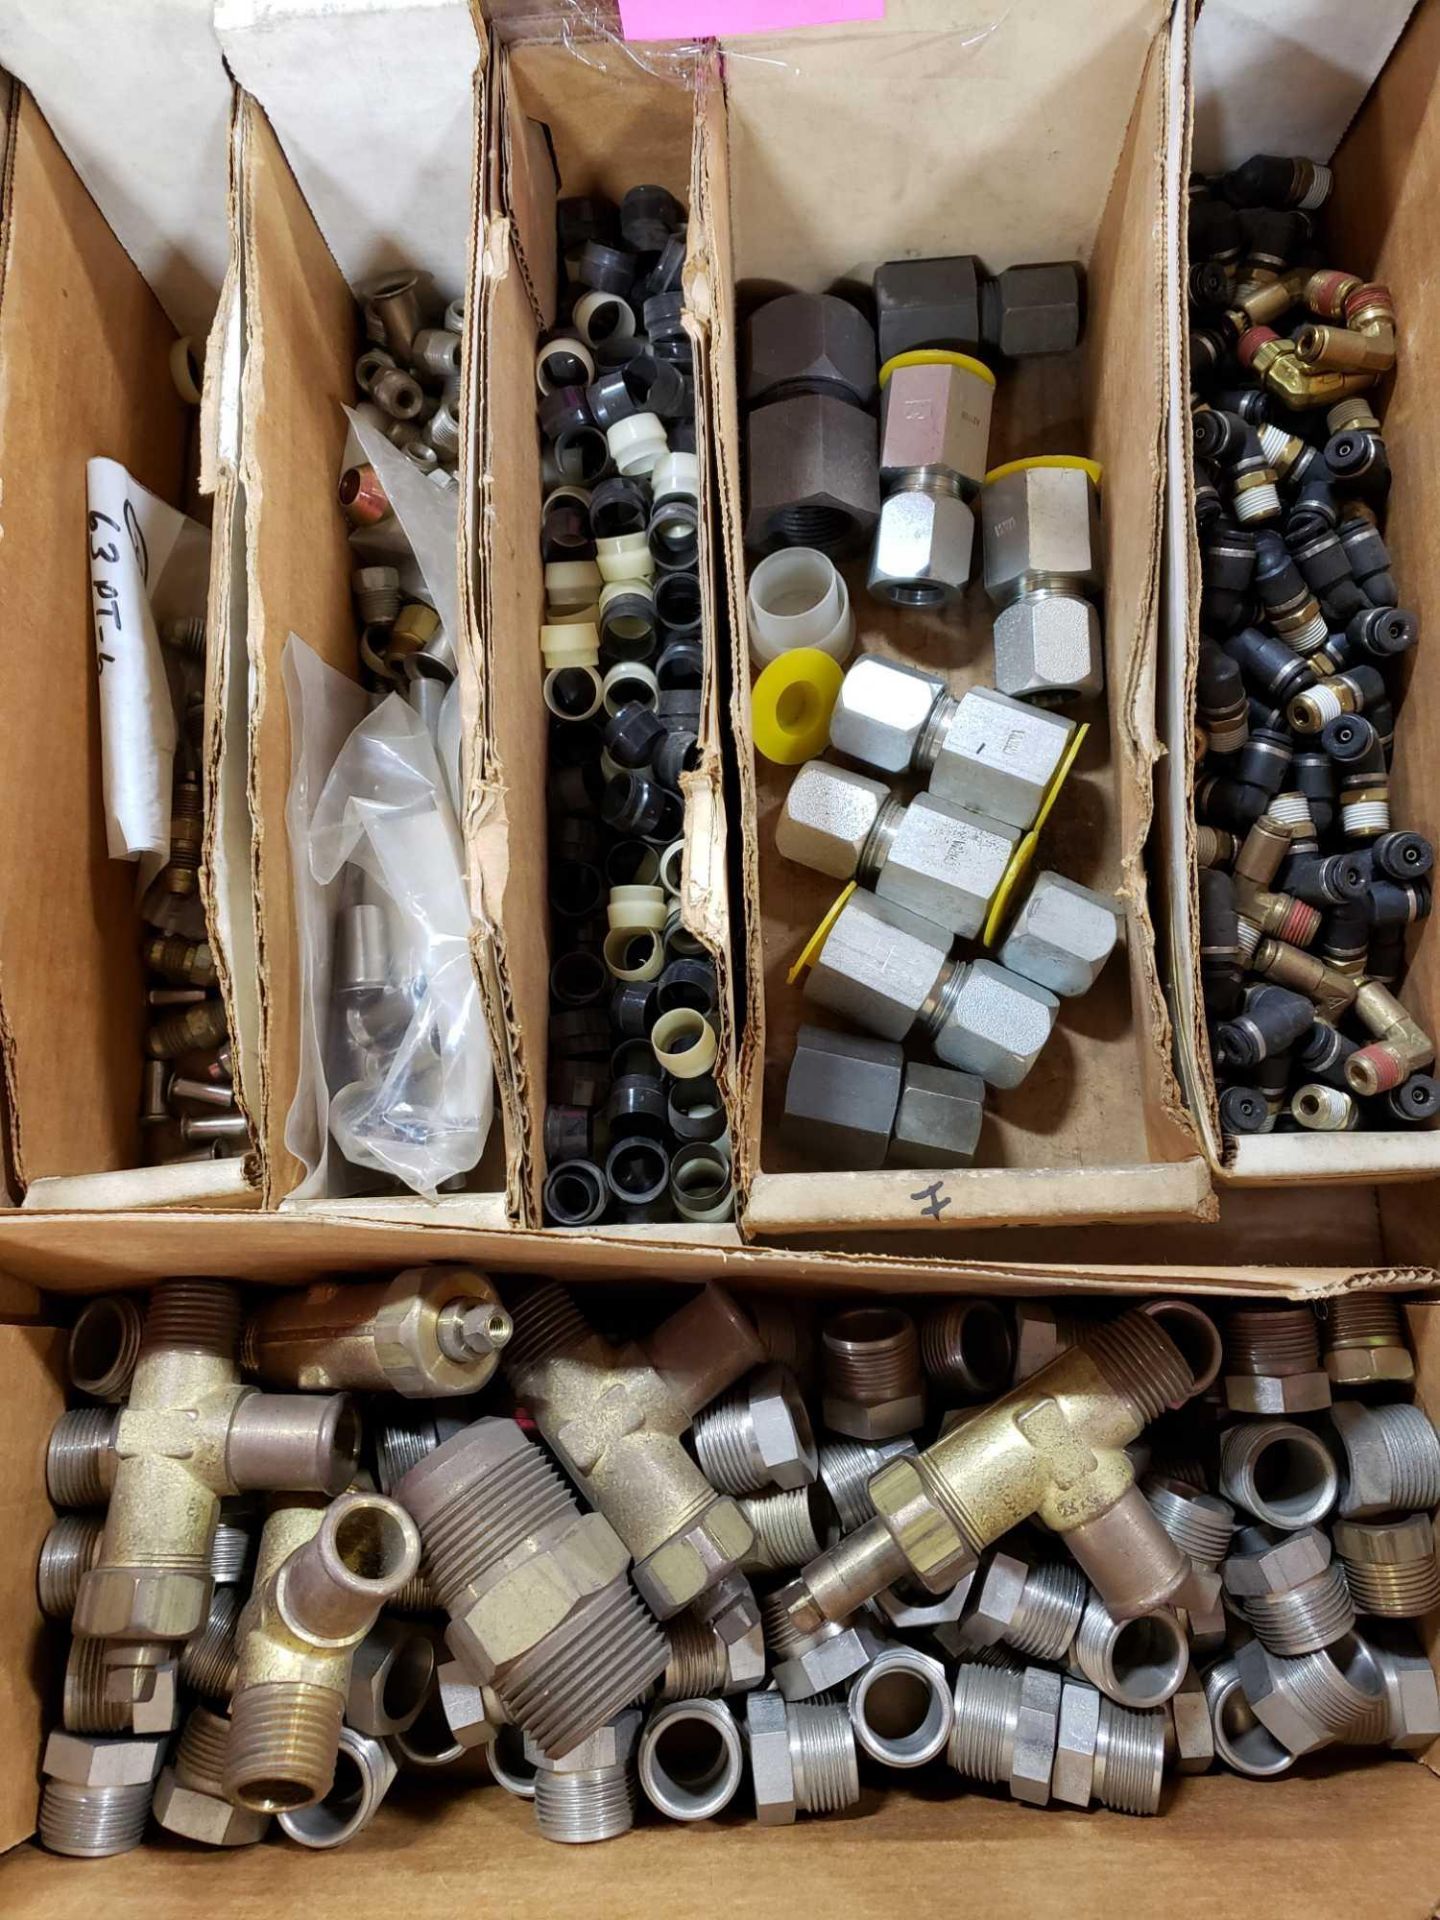 Lot of assorted hydraulic and pneumatic fittings. Some brass. New as pictured. - Image 2 of 2